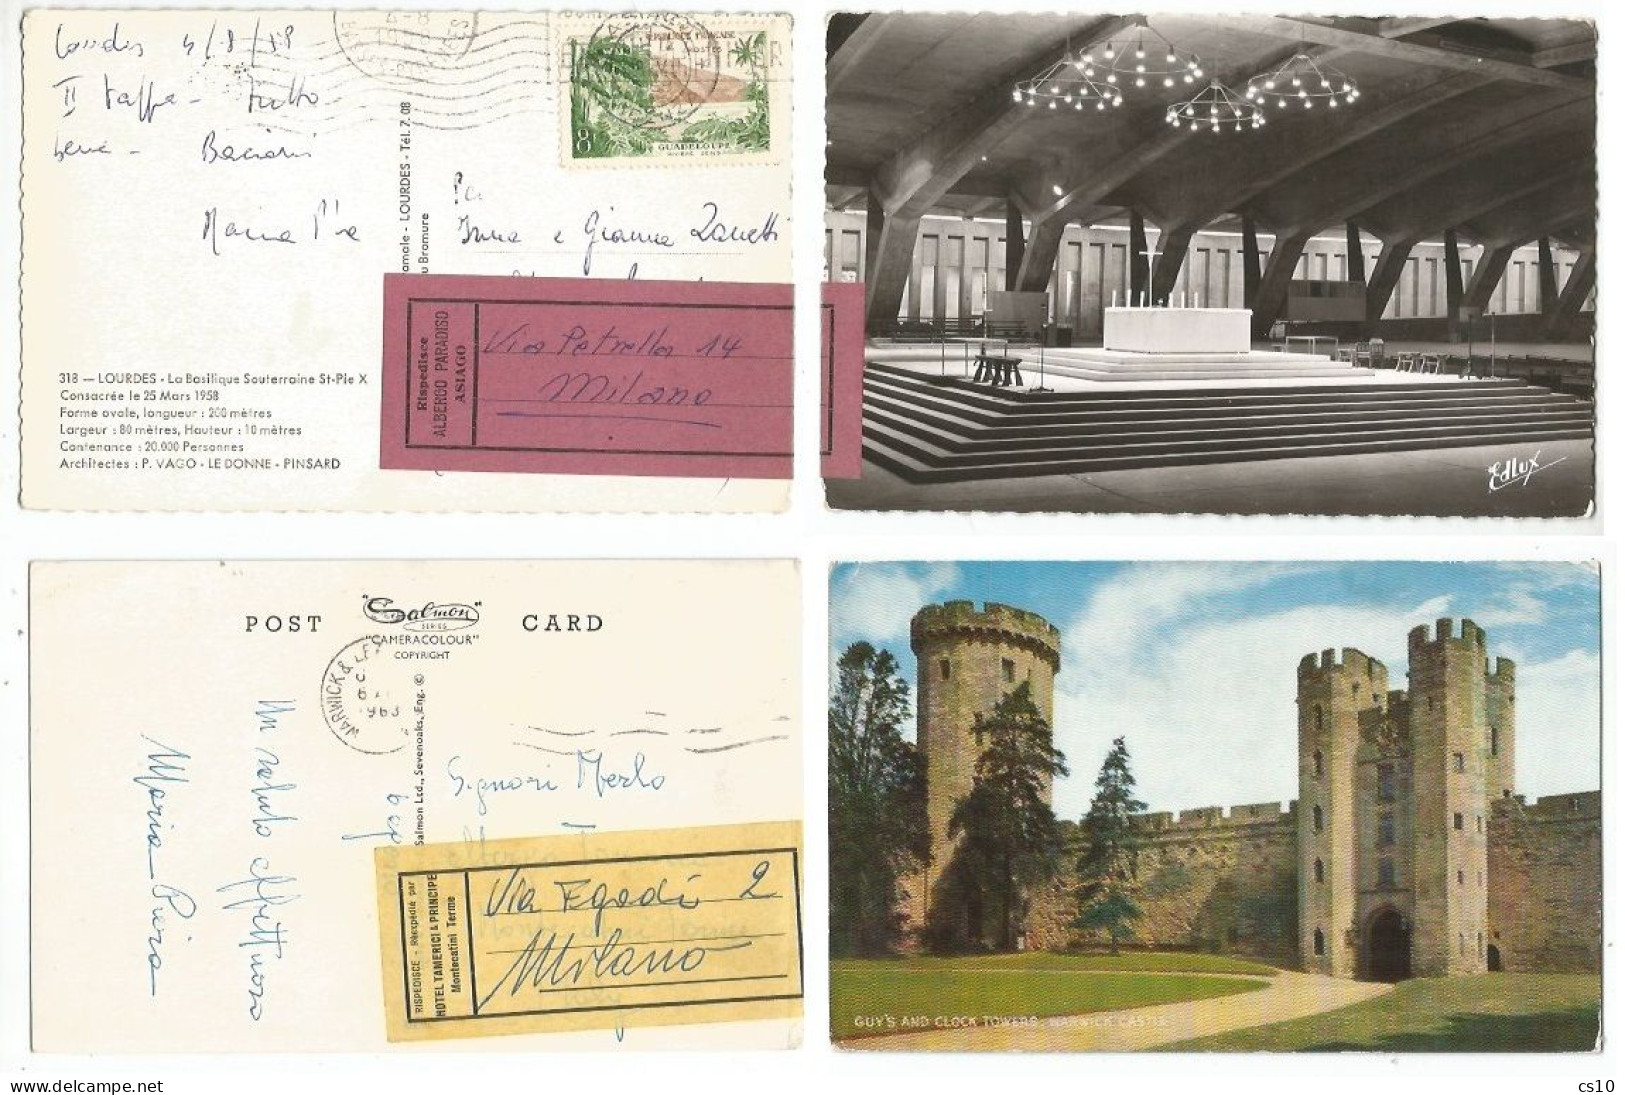 Hotel Mail Forwarding Labels # 2 Pcards From UK & France By 2 Different Italy Hotels Asiago 1958 & Montecatini Terme '63 - Poste